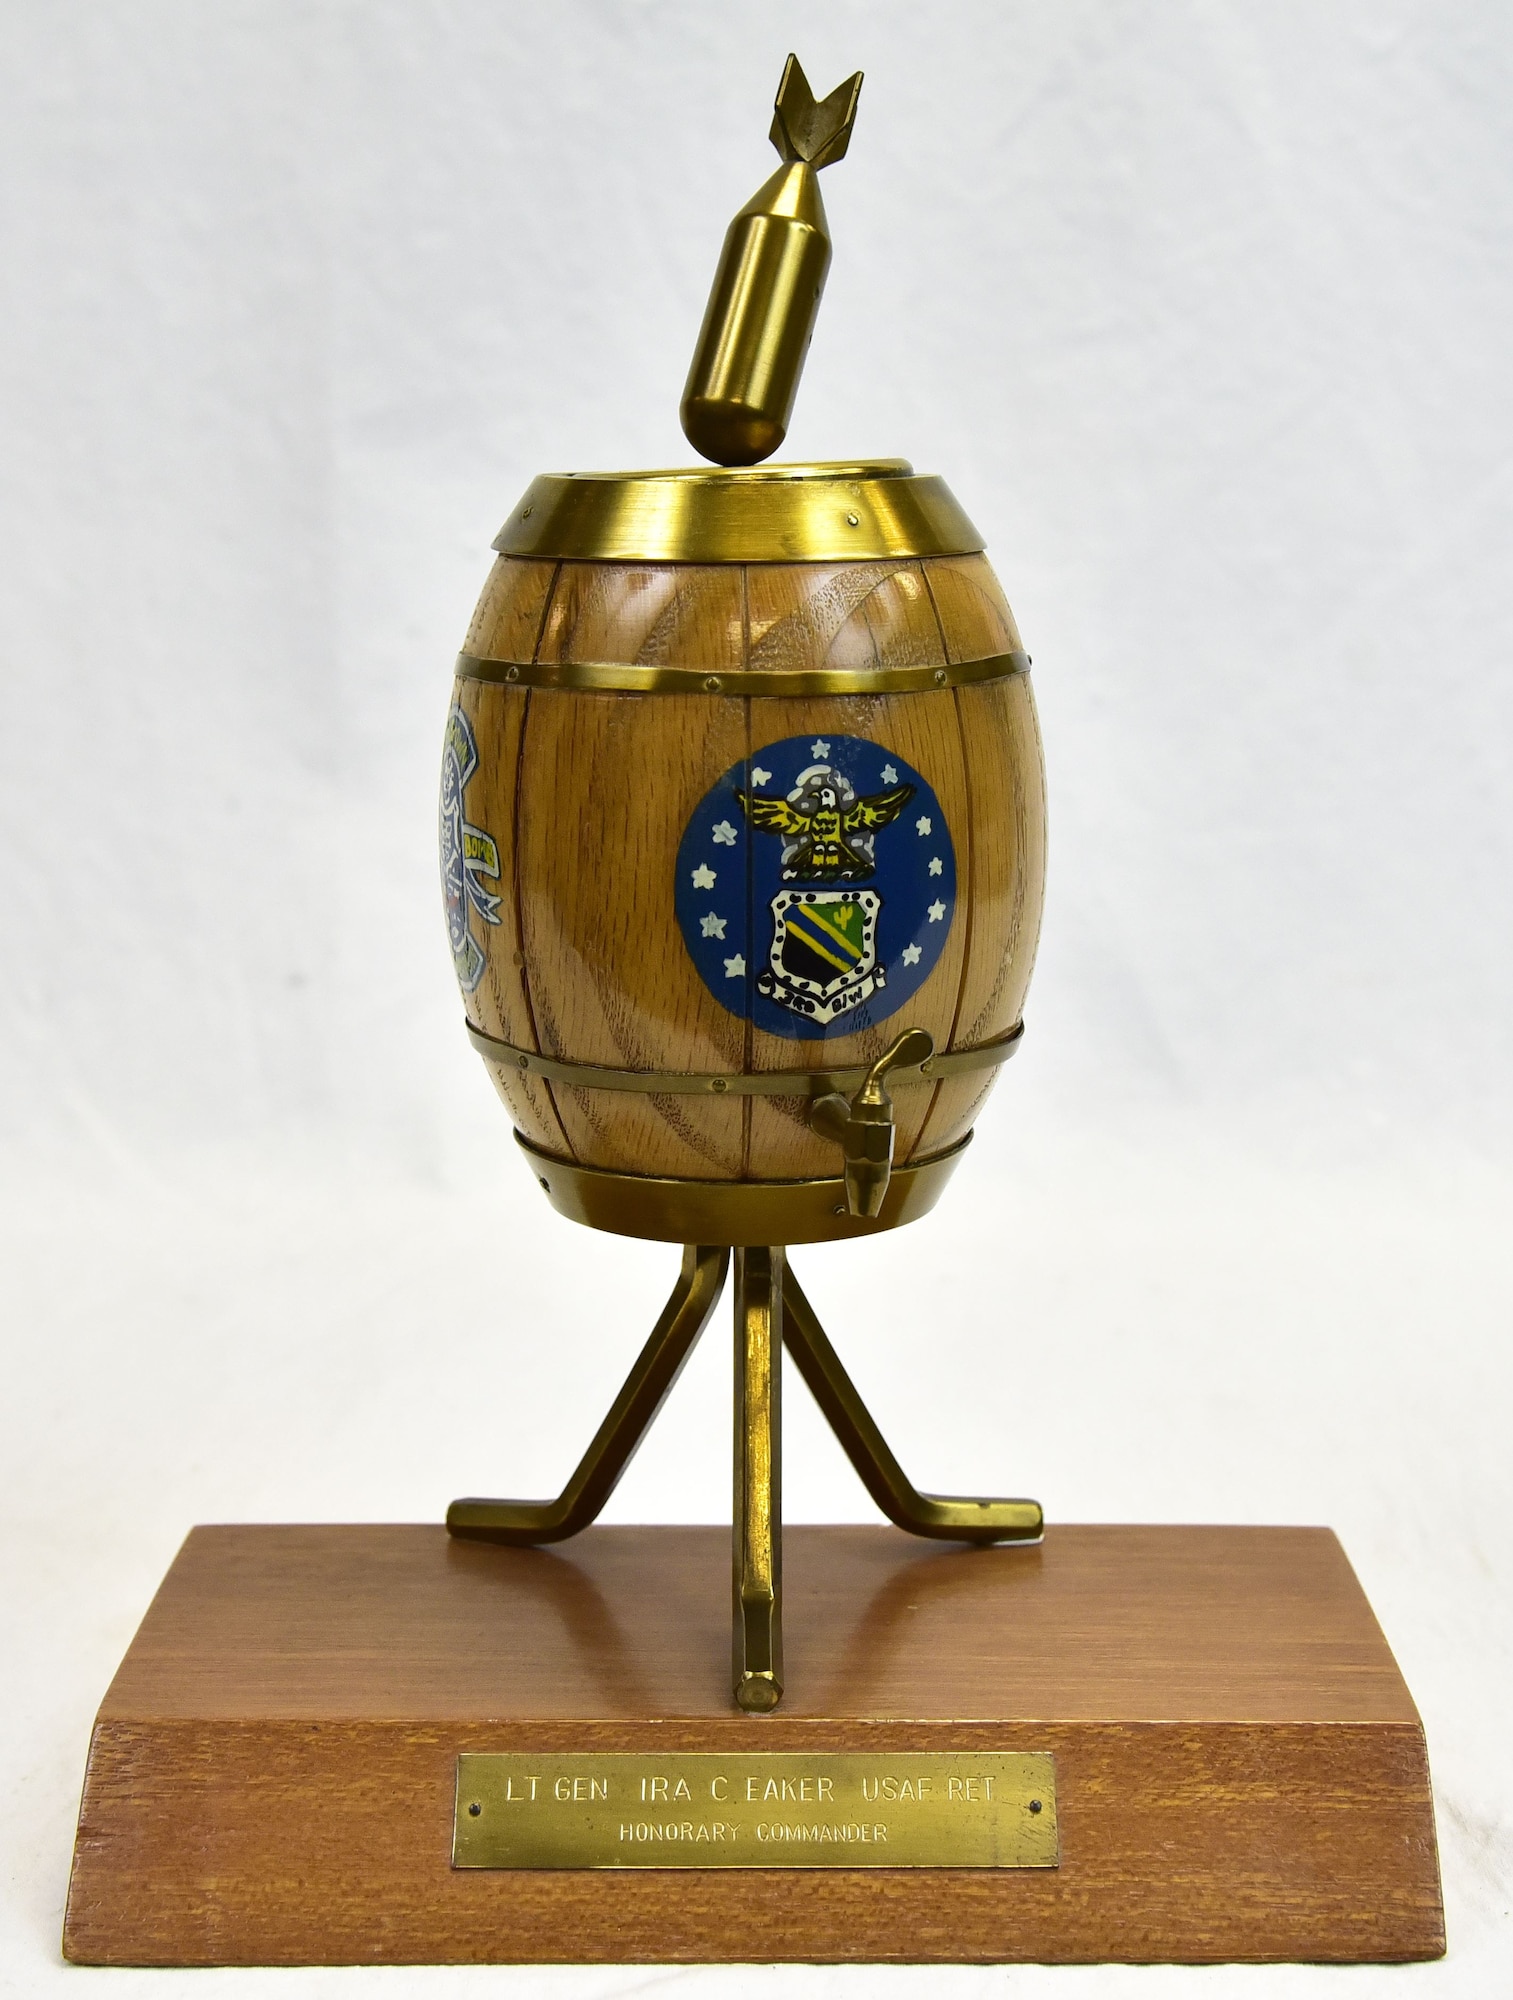 Plans call for this artifact to be displayed near the B-17F Memphis Belle™ as part of the new strategic bombardment exhibit in the WWII Gallery, which opens to the public on May 17, 2018. Gen Ira Eaker received this commemorative “bomb in a pickle barrel” trophy to recognize his role in the strategic bombing campaign.